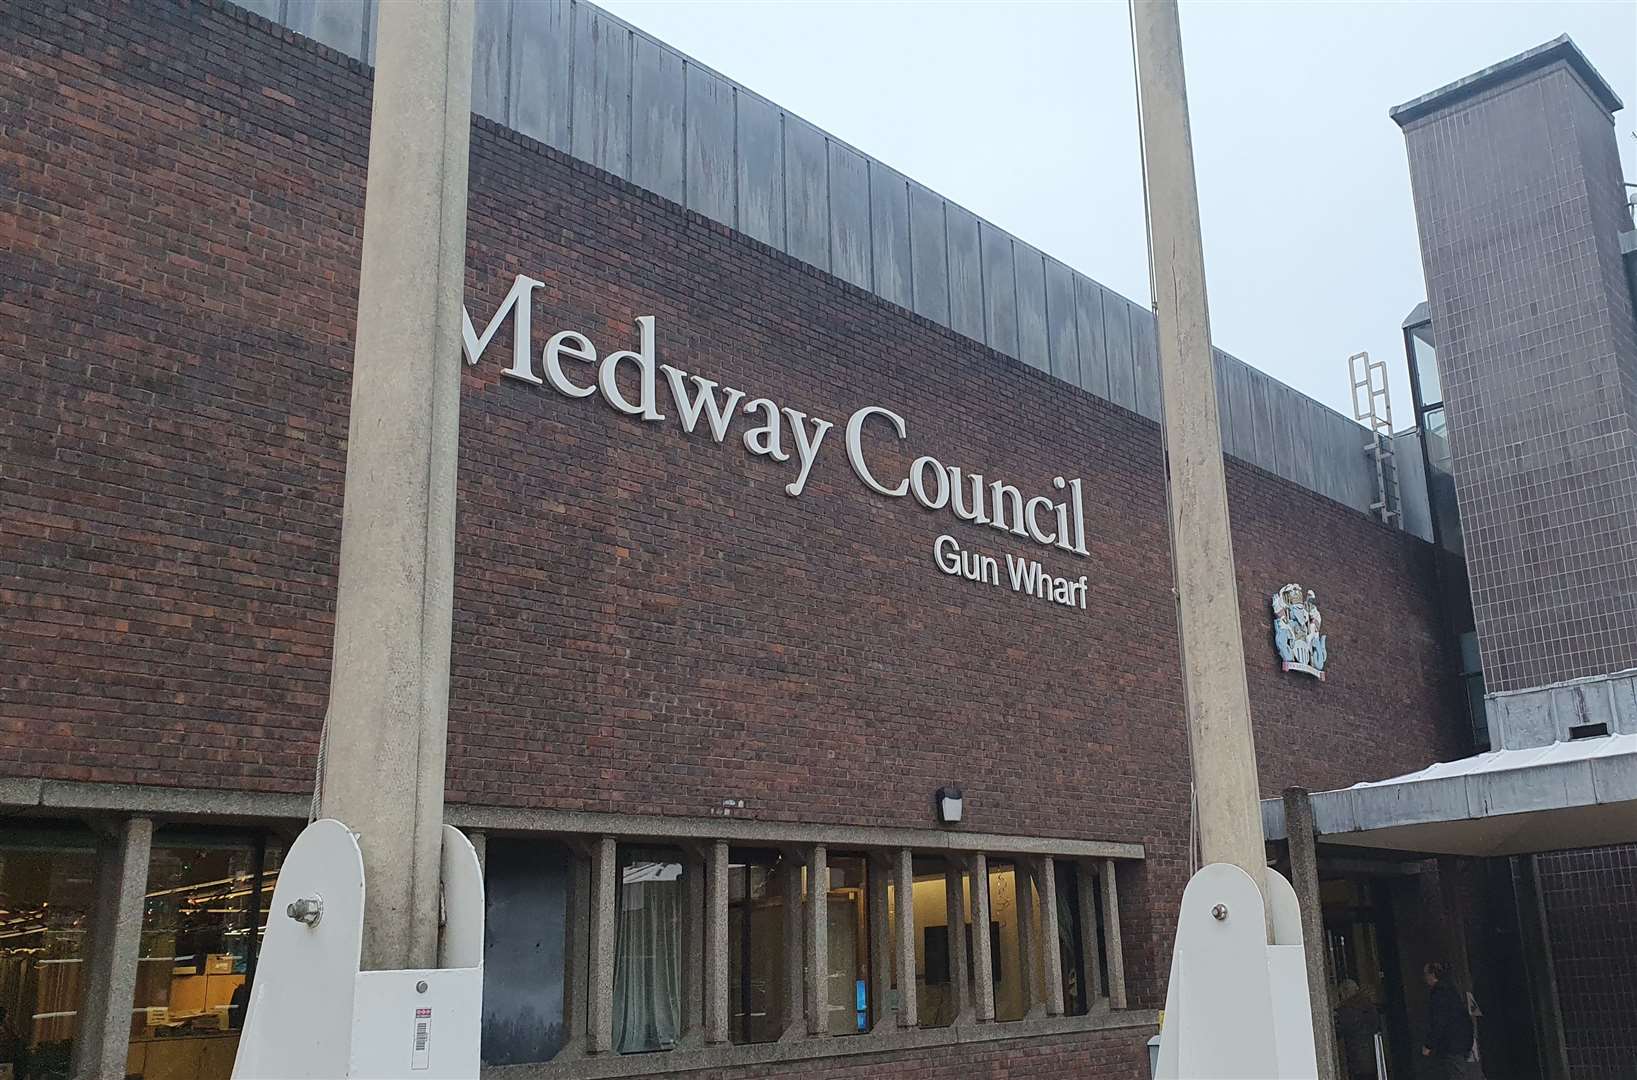 The meeting was held at Medway Council's headquarters, Gun Wharf